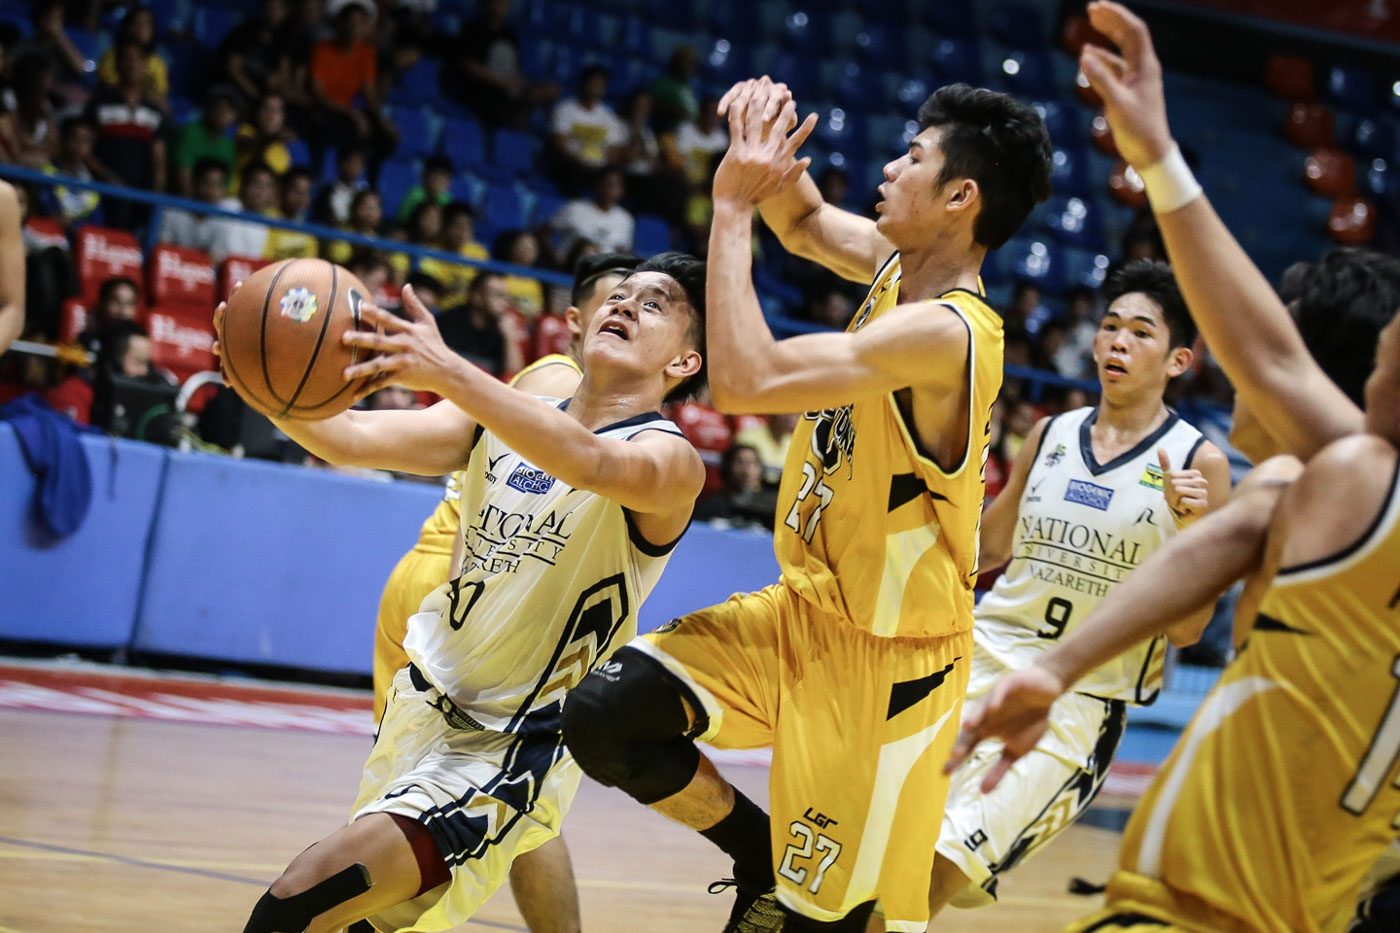 NU Bullpups advance to finals at the expense of UST Tiger Cubs